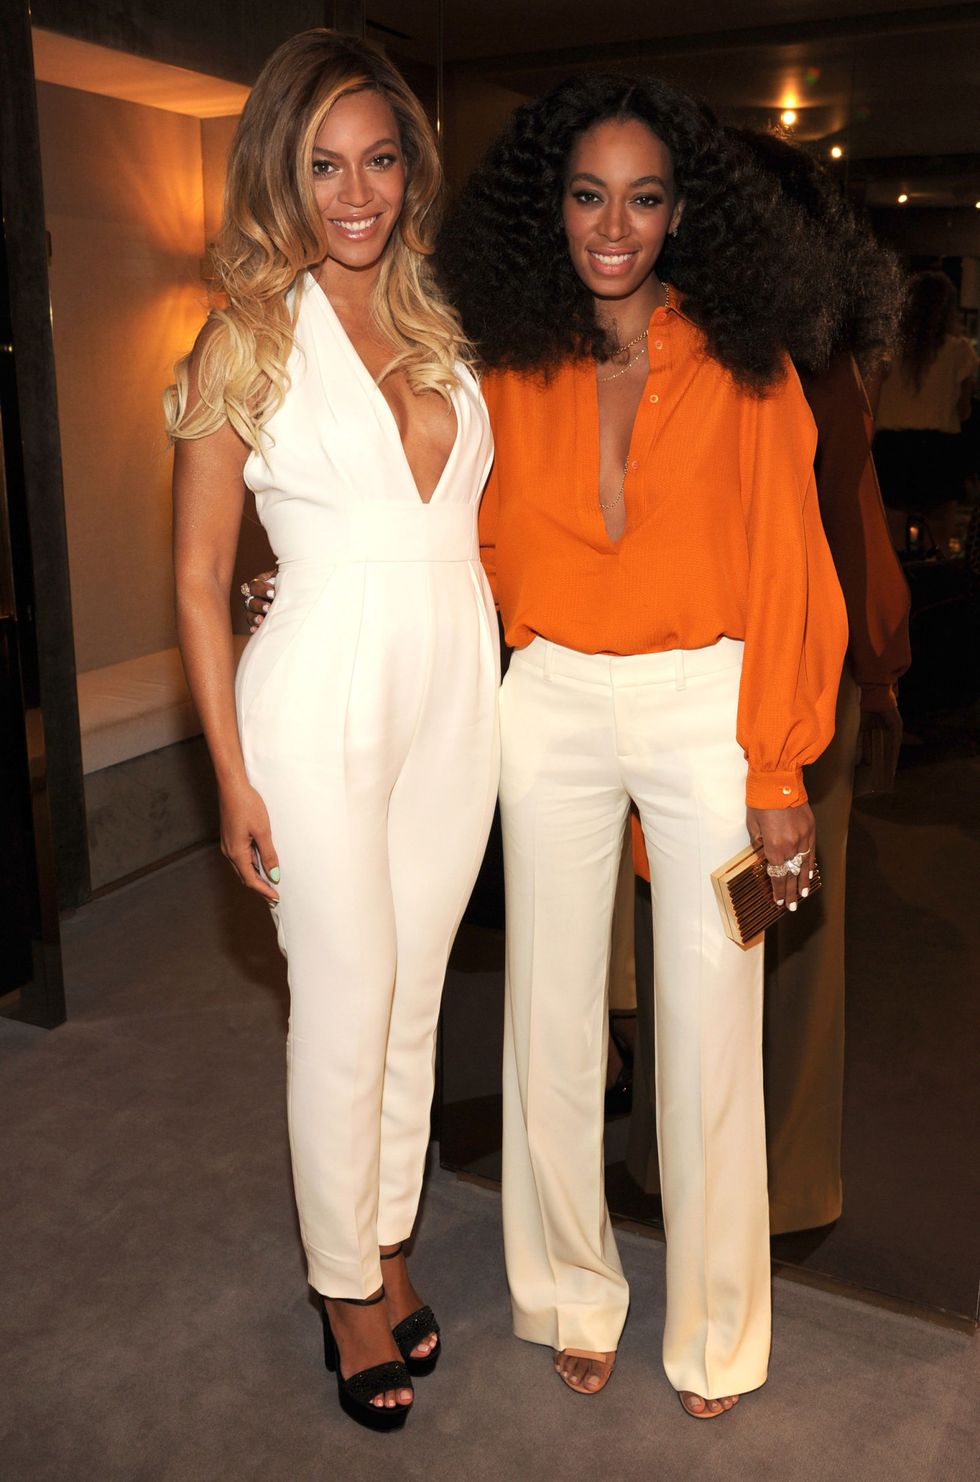 <p>How old is Beyoncé, really? According to one wild conspiracy theory, she's in her early 40s and on top of that, she's Solange's mother — not sister. This is based on several things that come with no solid proof whatsoever: (1) a birth certificate from the <a href="http://www.tmz.com/2006/12/08/beyonces-32-girl-you-really-are-dreaming/">Department of Health in Texas</a> that supposedly shows Beyoncé's birth year as 1974; (2) people hanging on to every word from a Gabrielle Union interview in which she claims she's been friends with Bey since they were teens (Gabrielle was born in 1972); (3) <a href="http://thetruthaboutcelebrities.blogspot.com/2011/04/truths-revealed.html">a rando Columbia Records employee</a> who claims to have seen Bey's driver's license ("don't ask how"), which apparently lists Bey's birth year as 1974. There's a related theory that mama Tina is actually Beyoncé's sister, but let's not even go there.</p>